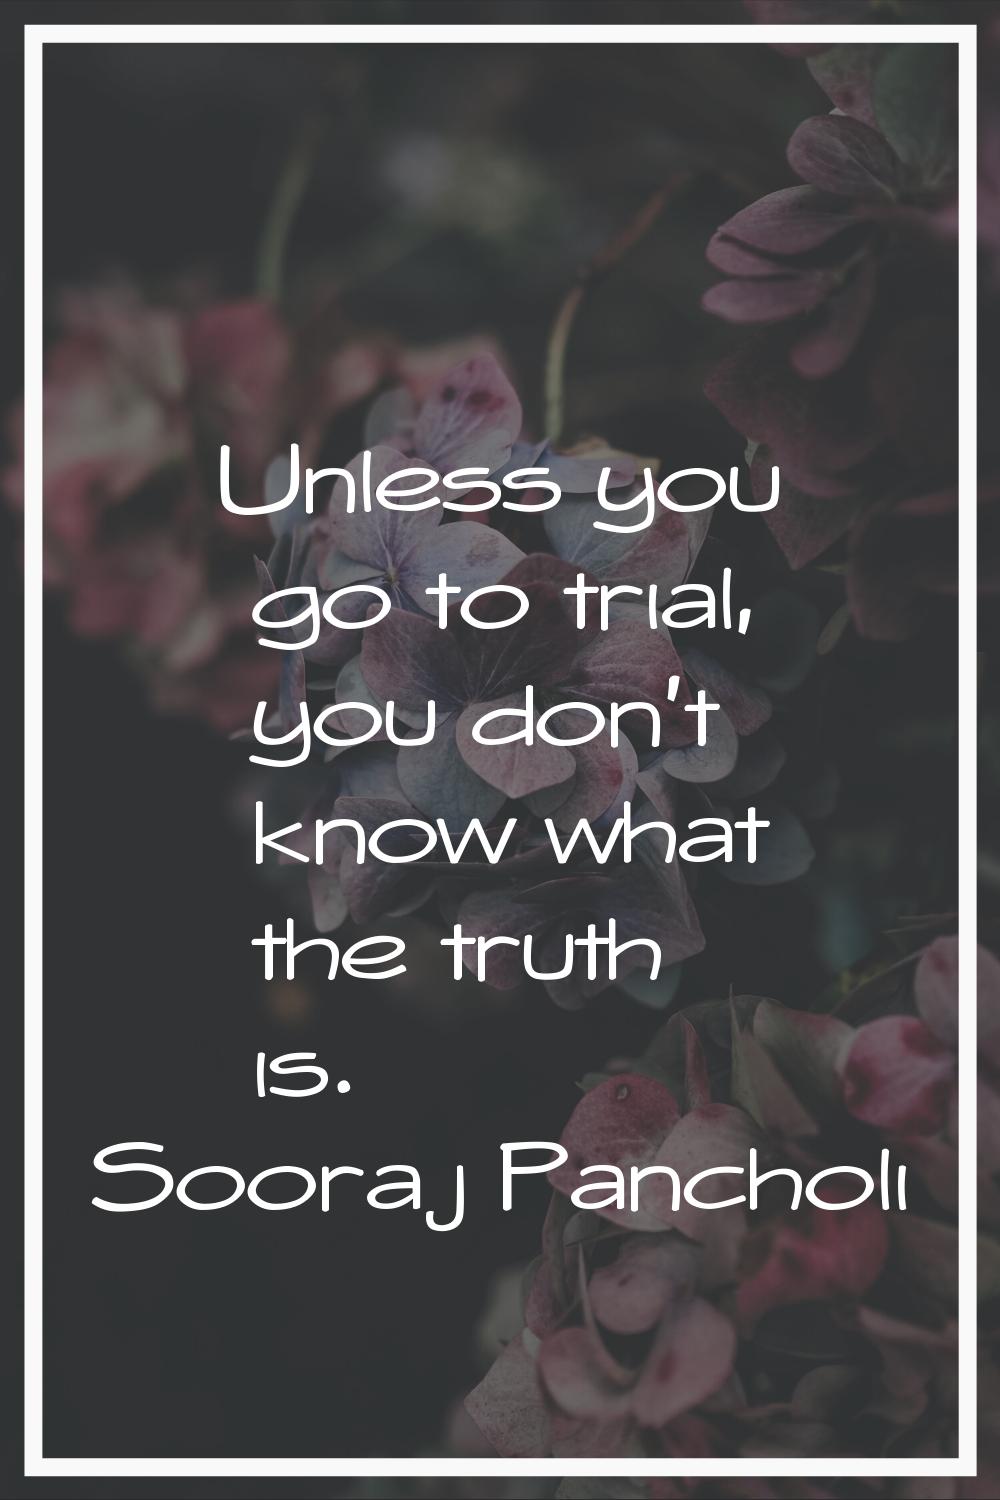 Unless you go to trial, you don't know what the truth is.